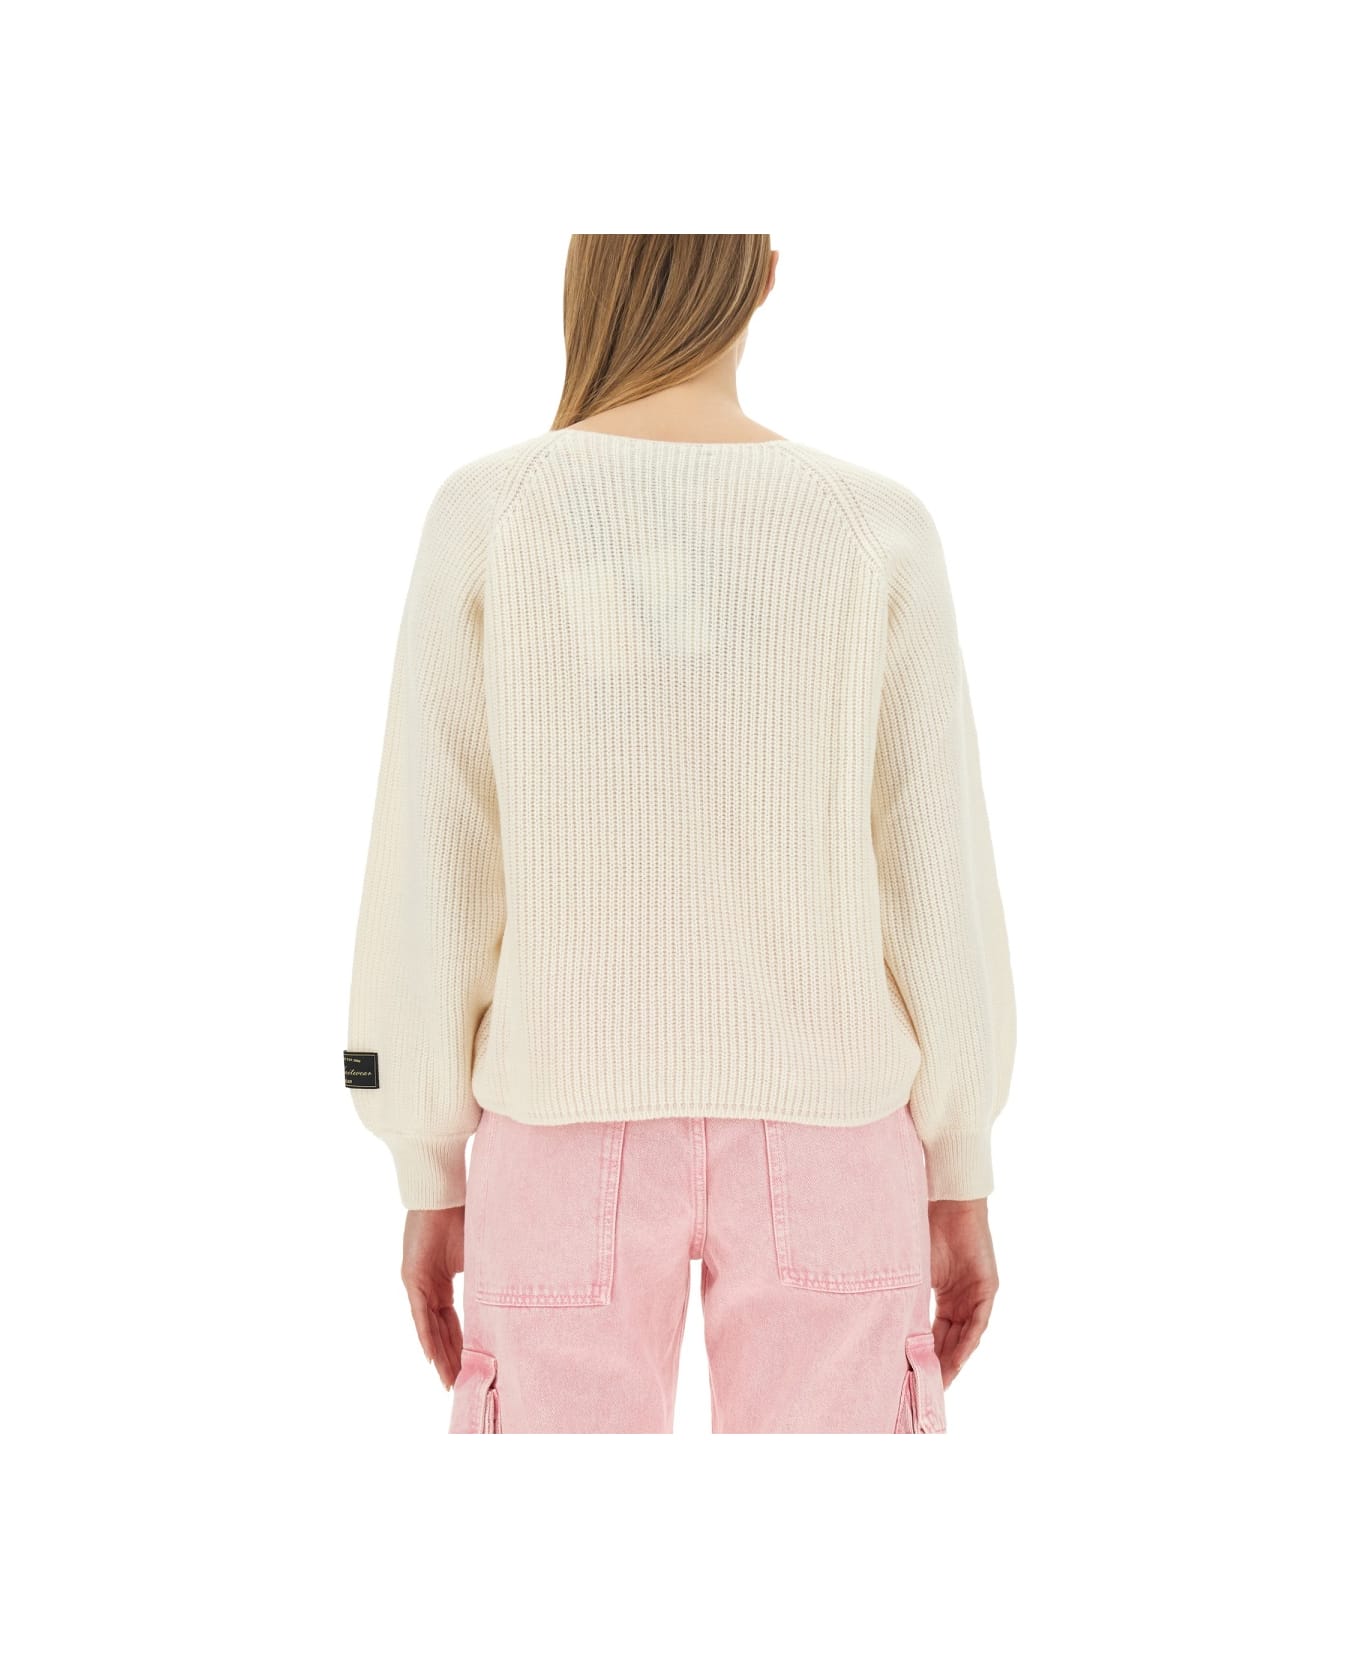 MSGM Knotted Sweater - WHITE